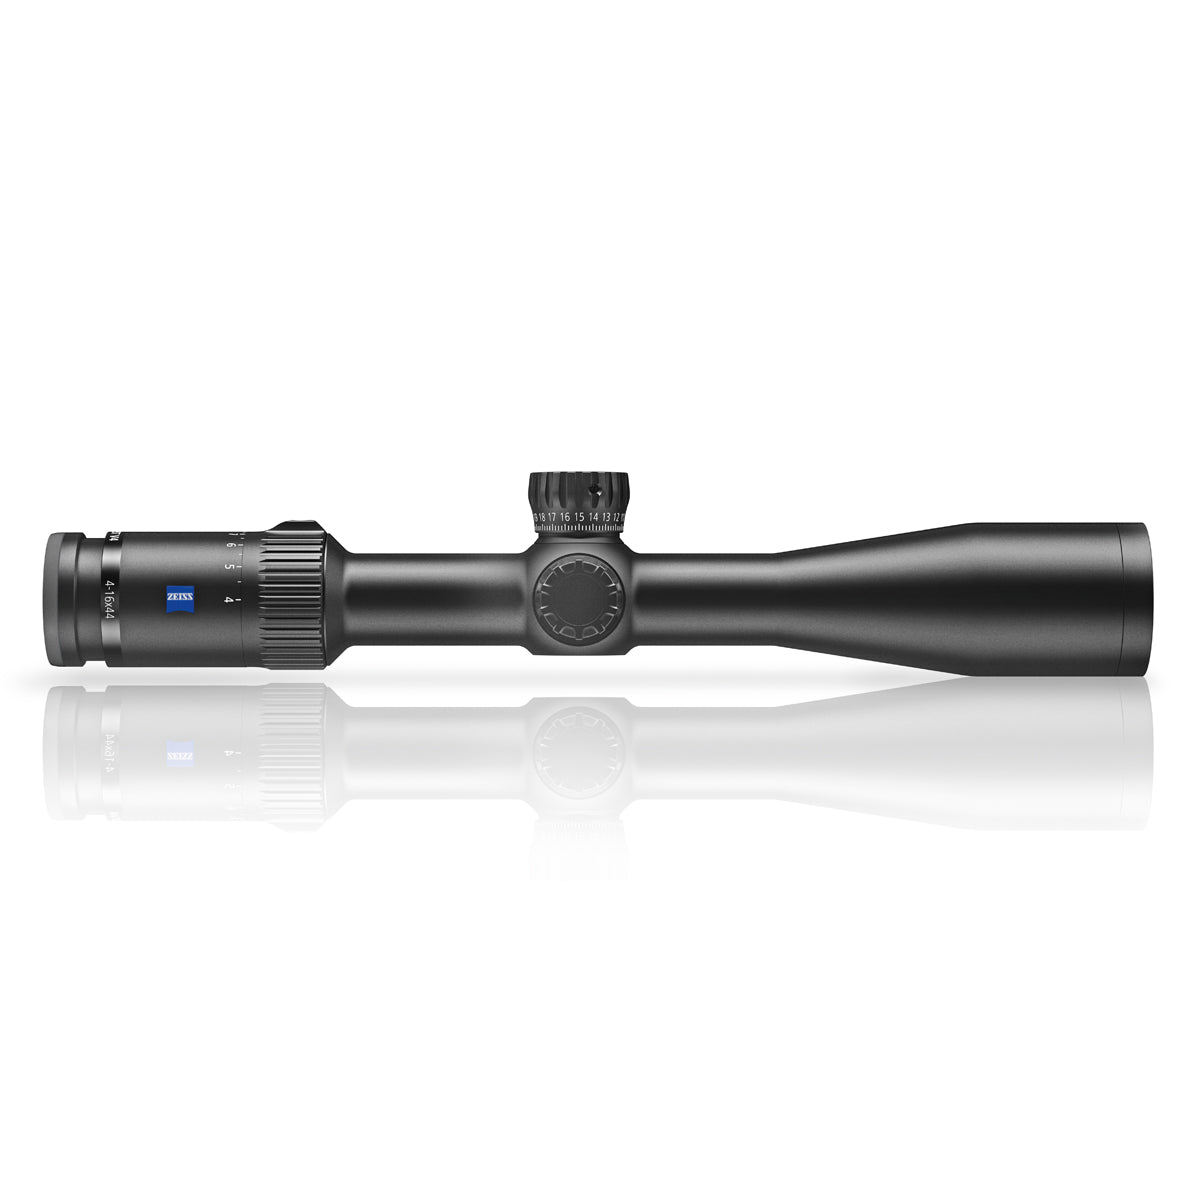 Zeiss Conquest V4 4-16x44 Riflescope ZMOA-2 Reticle in Zeiss Conquest V4 4-16x44 Riflescope ZMOA-2 Reticle by Zeiss | Optics - goHUNT Shop by GOHUNT | Zeiss - GOHUNT Shop